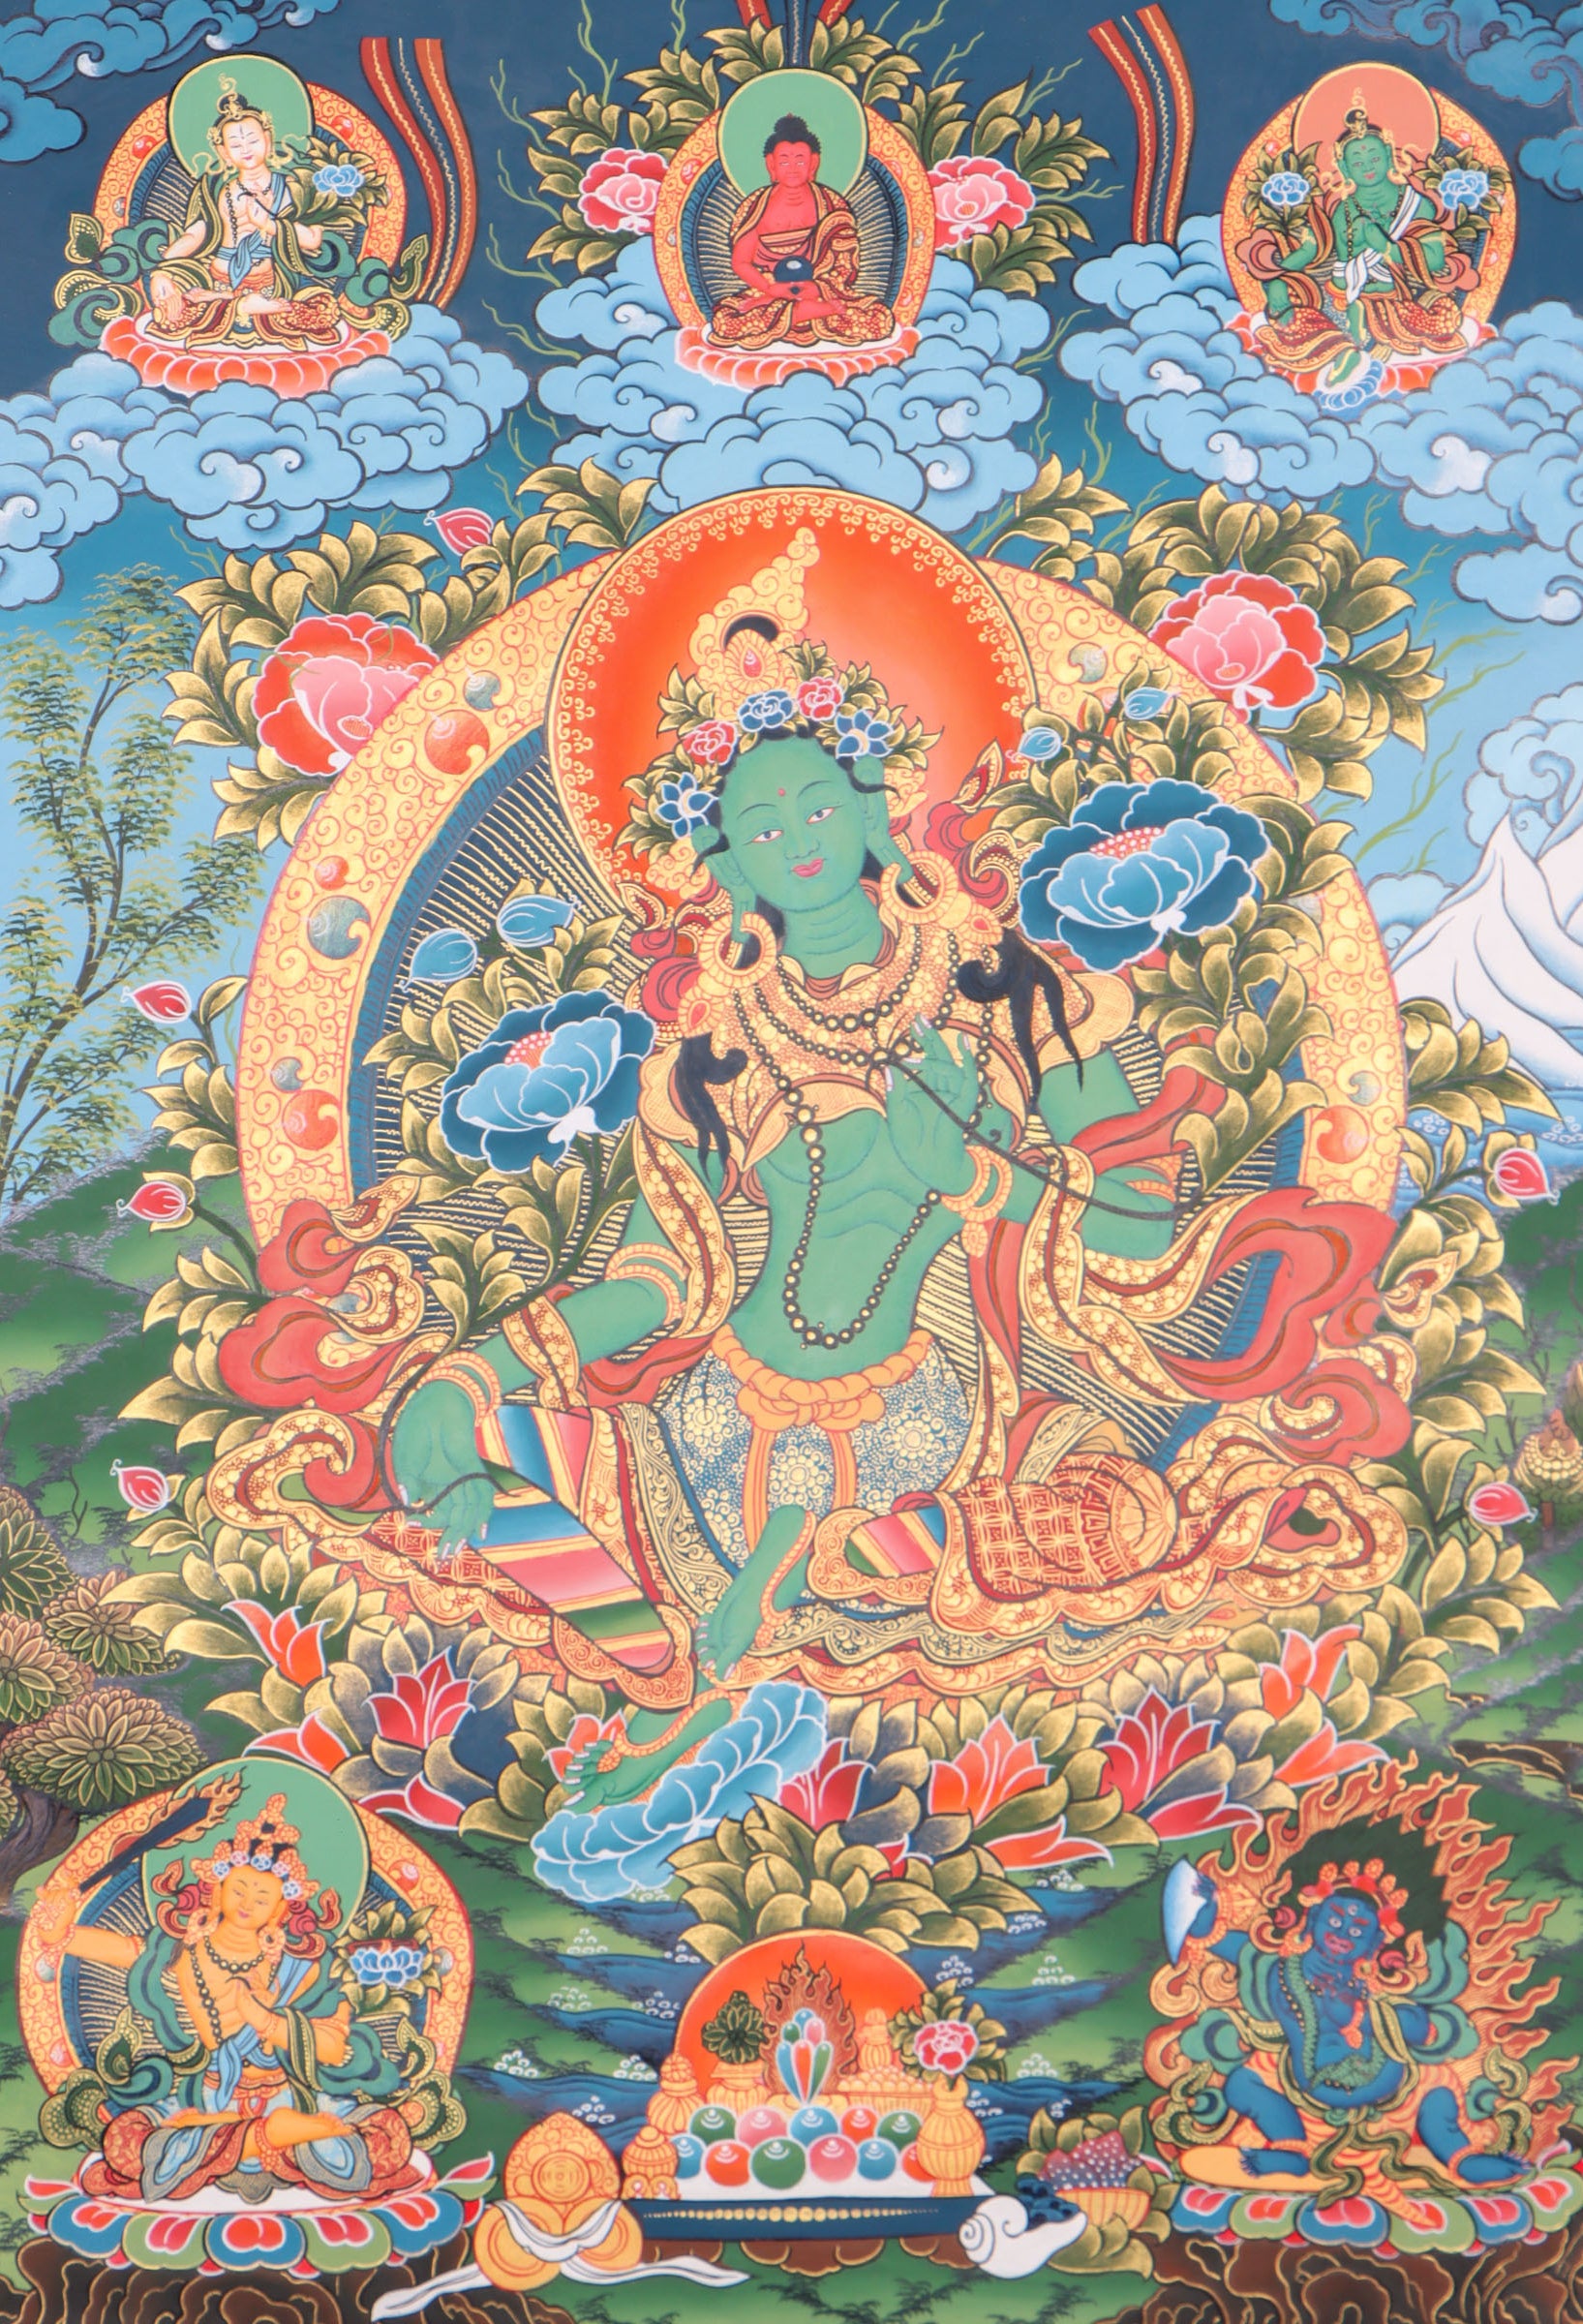 Green Tara Thangka Painting for wisdom and compassion.